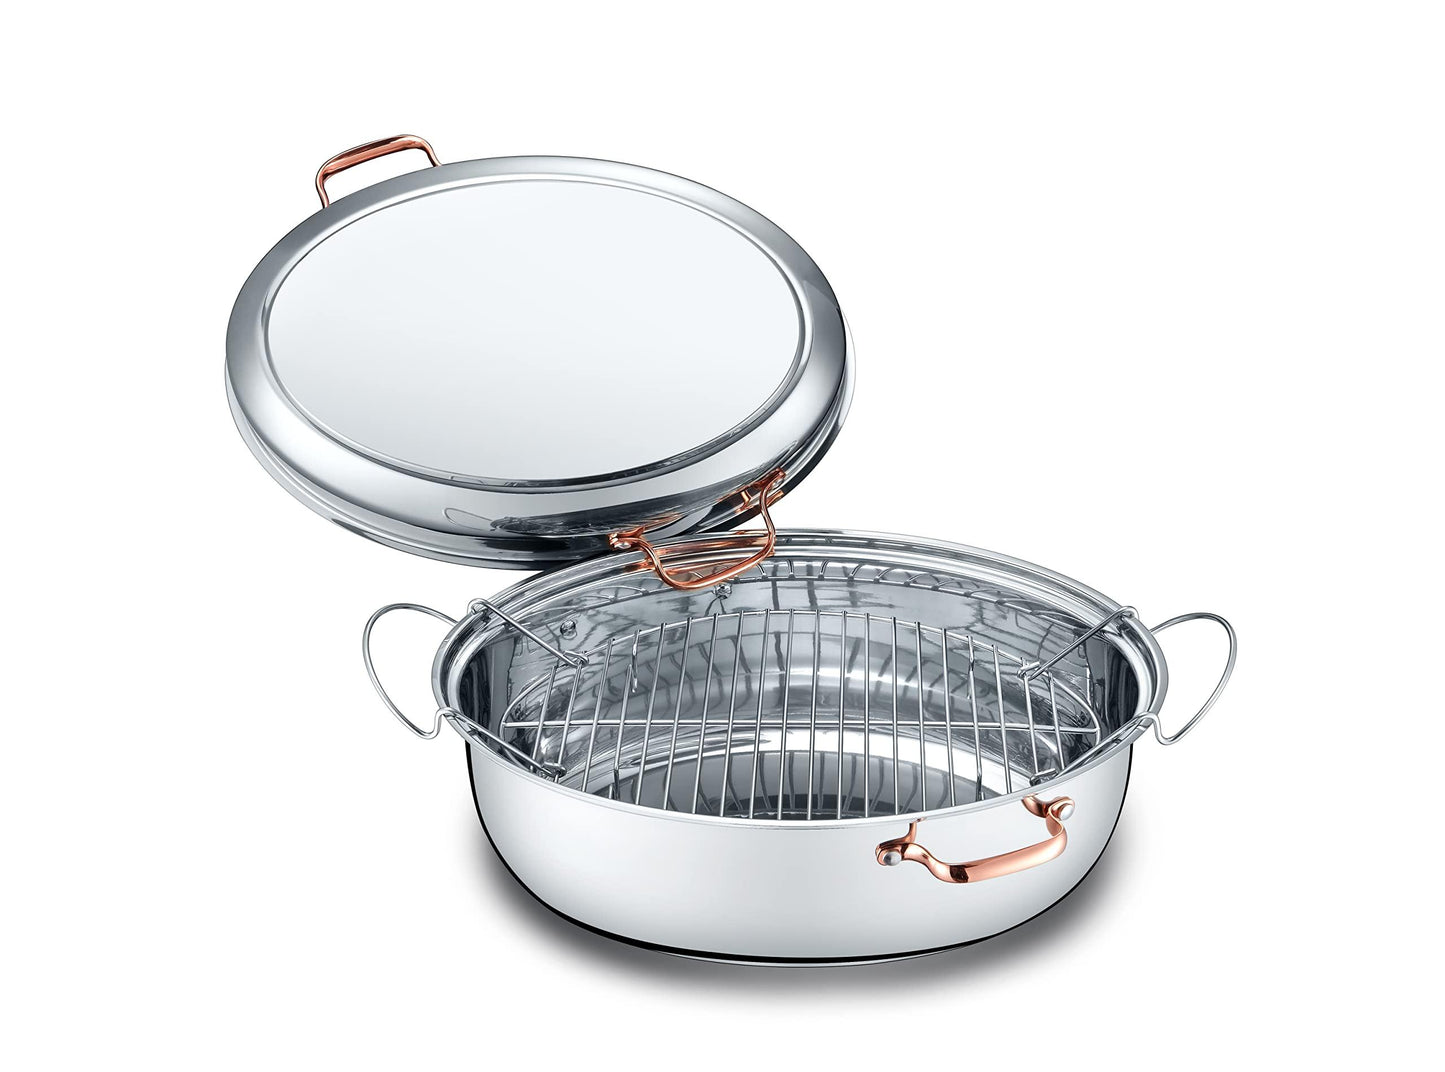 CONCORD Premium 12 Quart Stainless Steel Roasting Pan with Hangable Rack. Oval Turkey Roaster with Griddle Lid Multi-use Cookware - CookCave